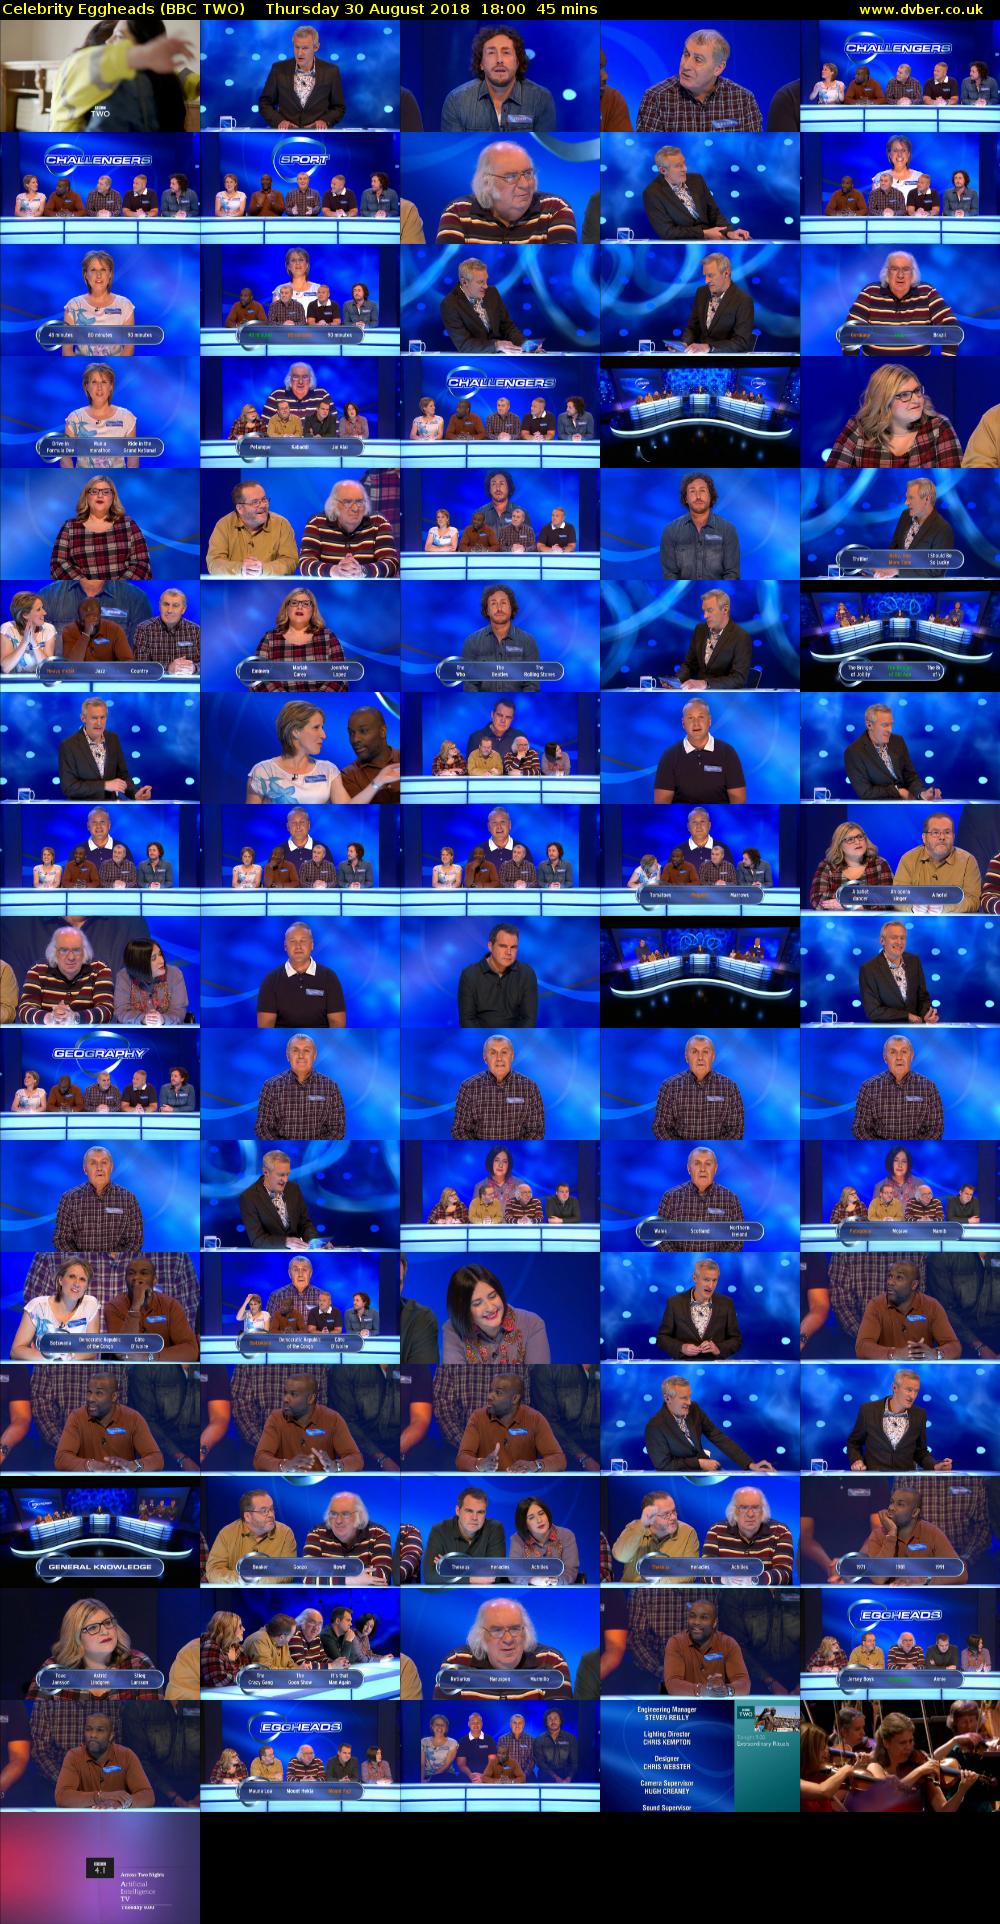 Celebrity Eggheads (BBC TWO) Thursday 30 August 2018 18:00 - 18:45